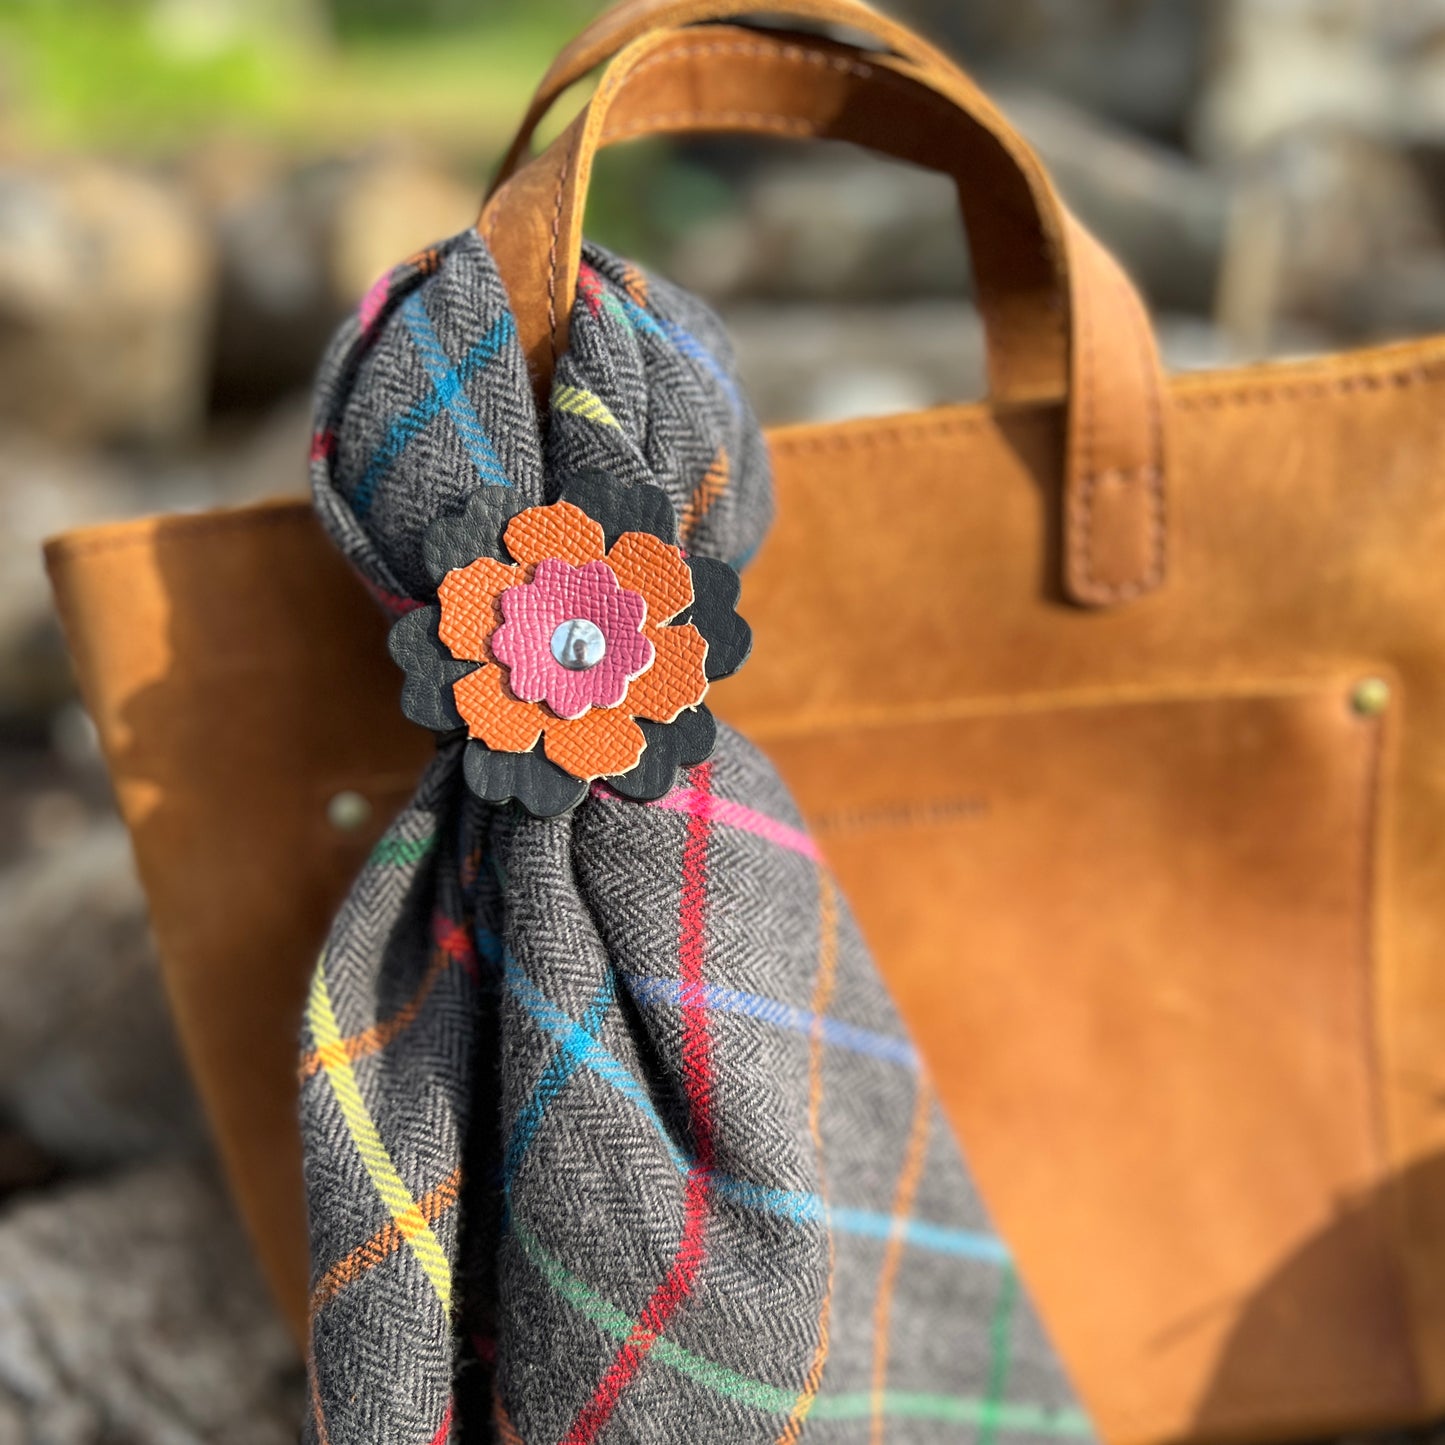 Fall Flannel Purse Scarf and Leather Flower Ring Gift Set